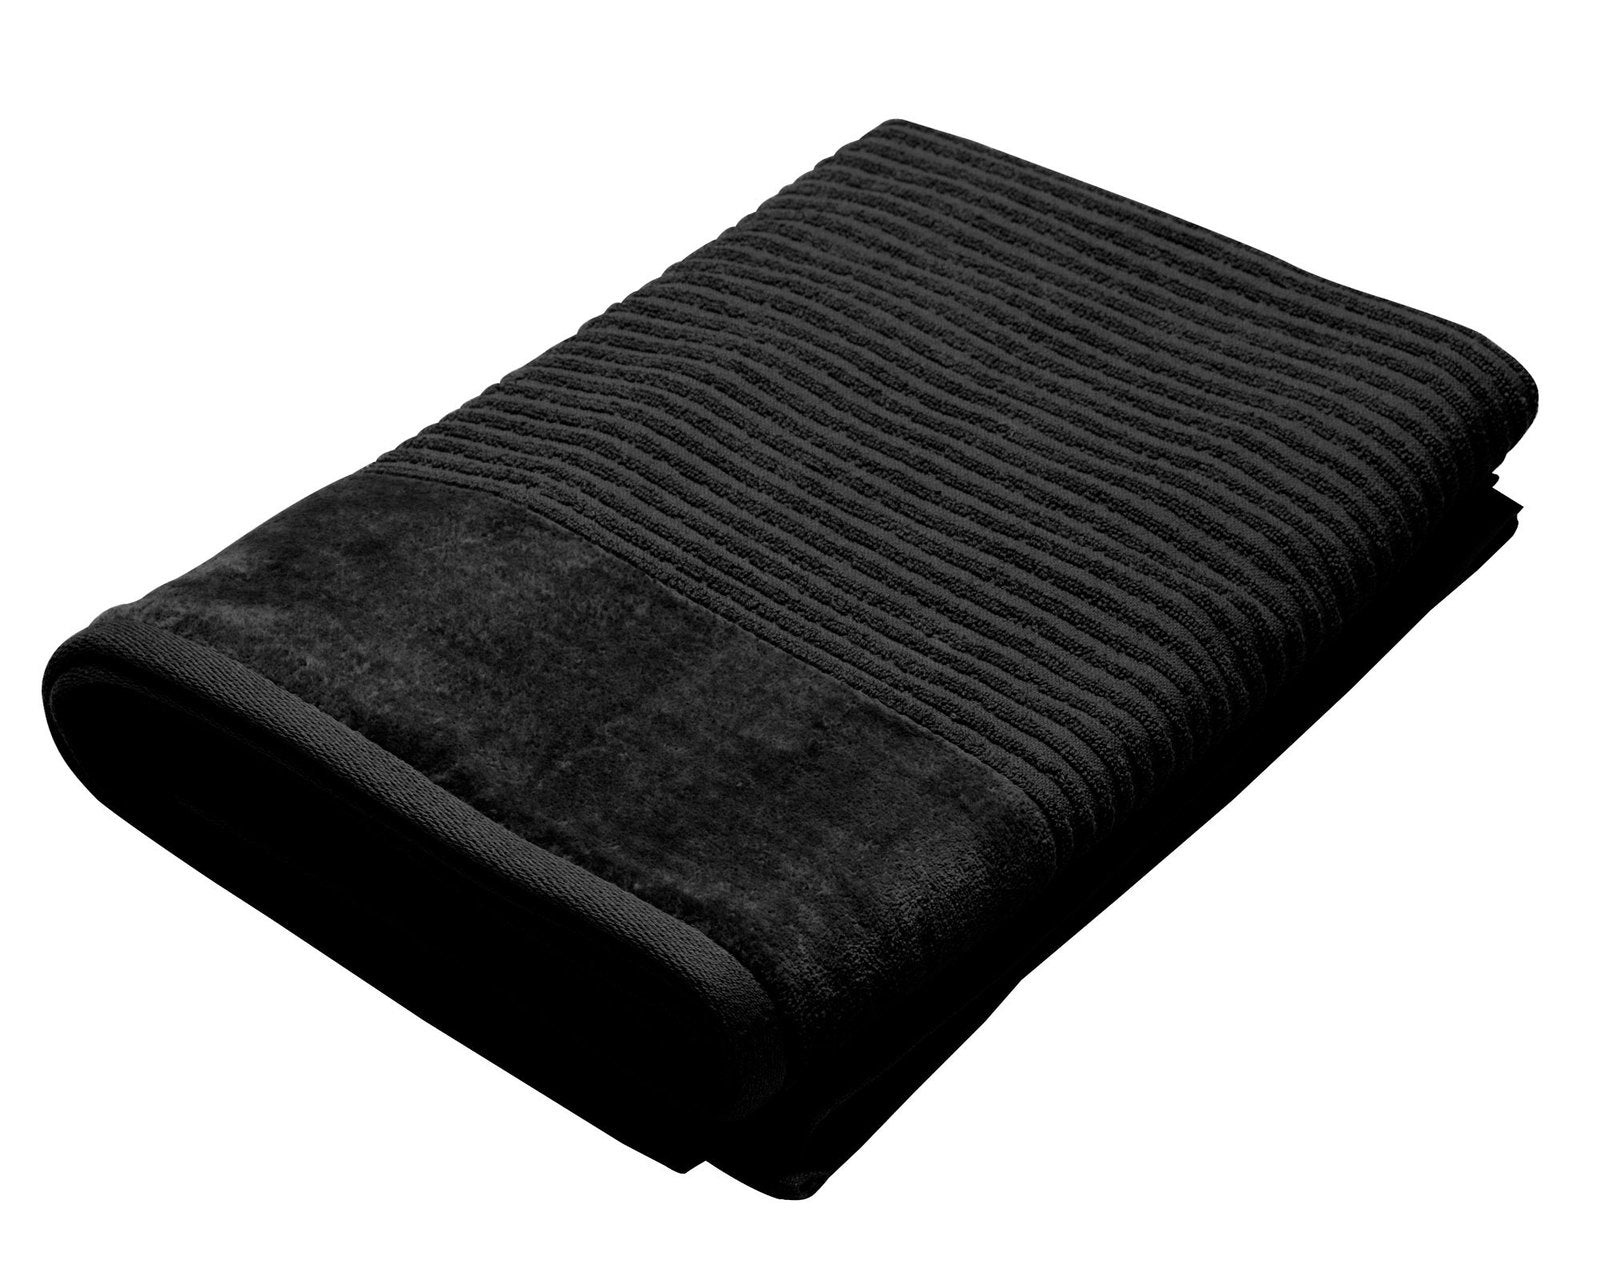 Jenny Mclean Royal Excellency Bath Sheet 2 ply sheared Border 600GSM in Black